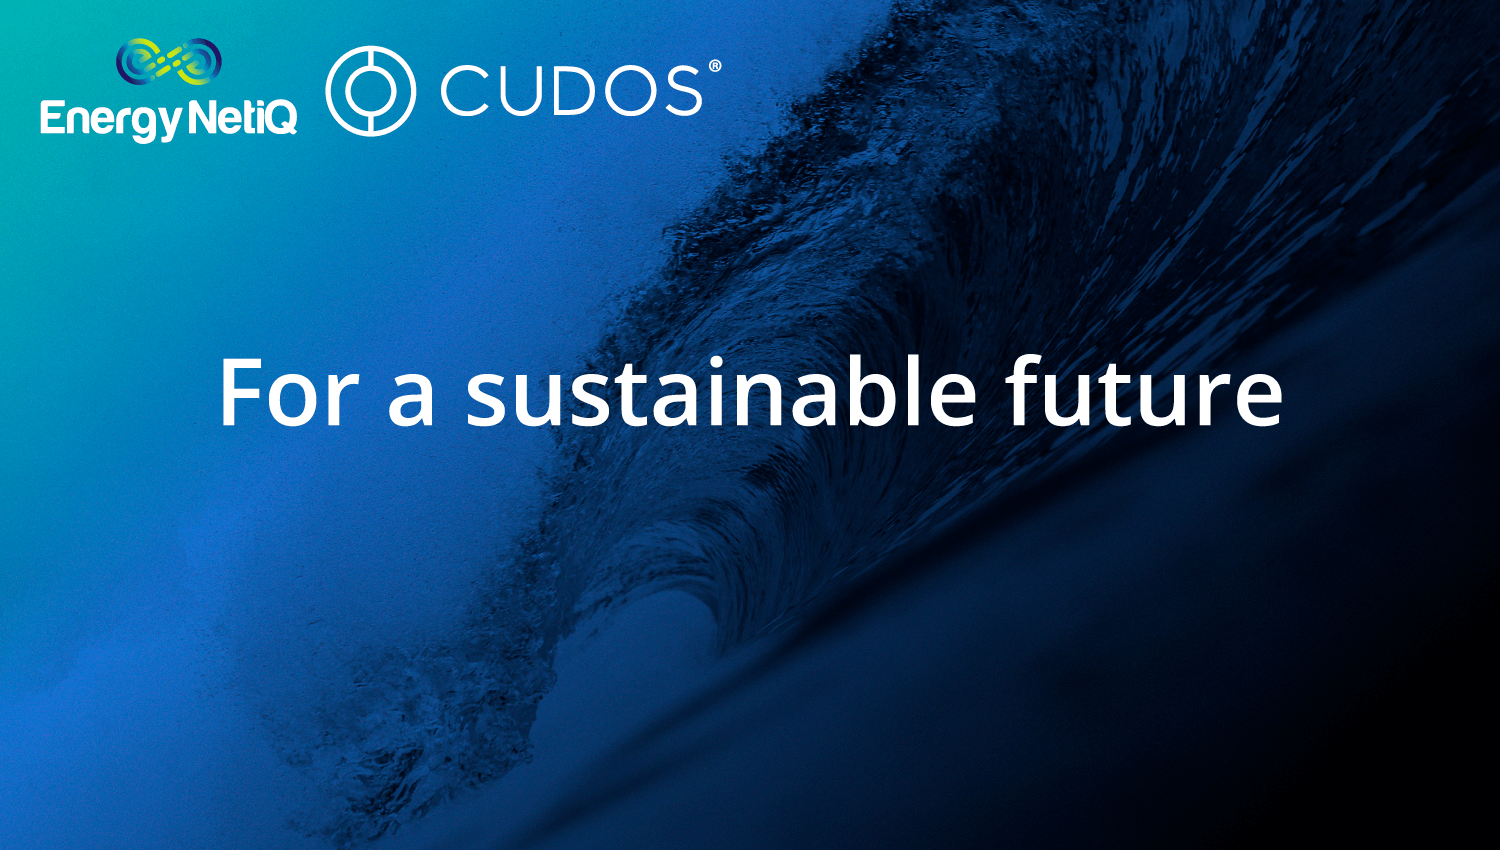 EnergyNetiQ envisions water as fuel aiming to scale with Cudos